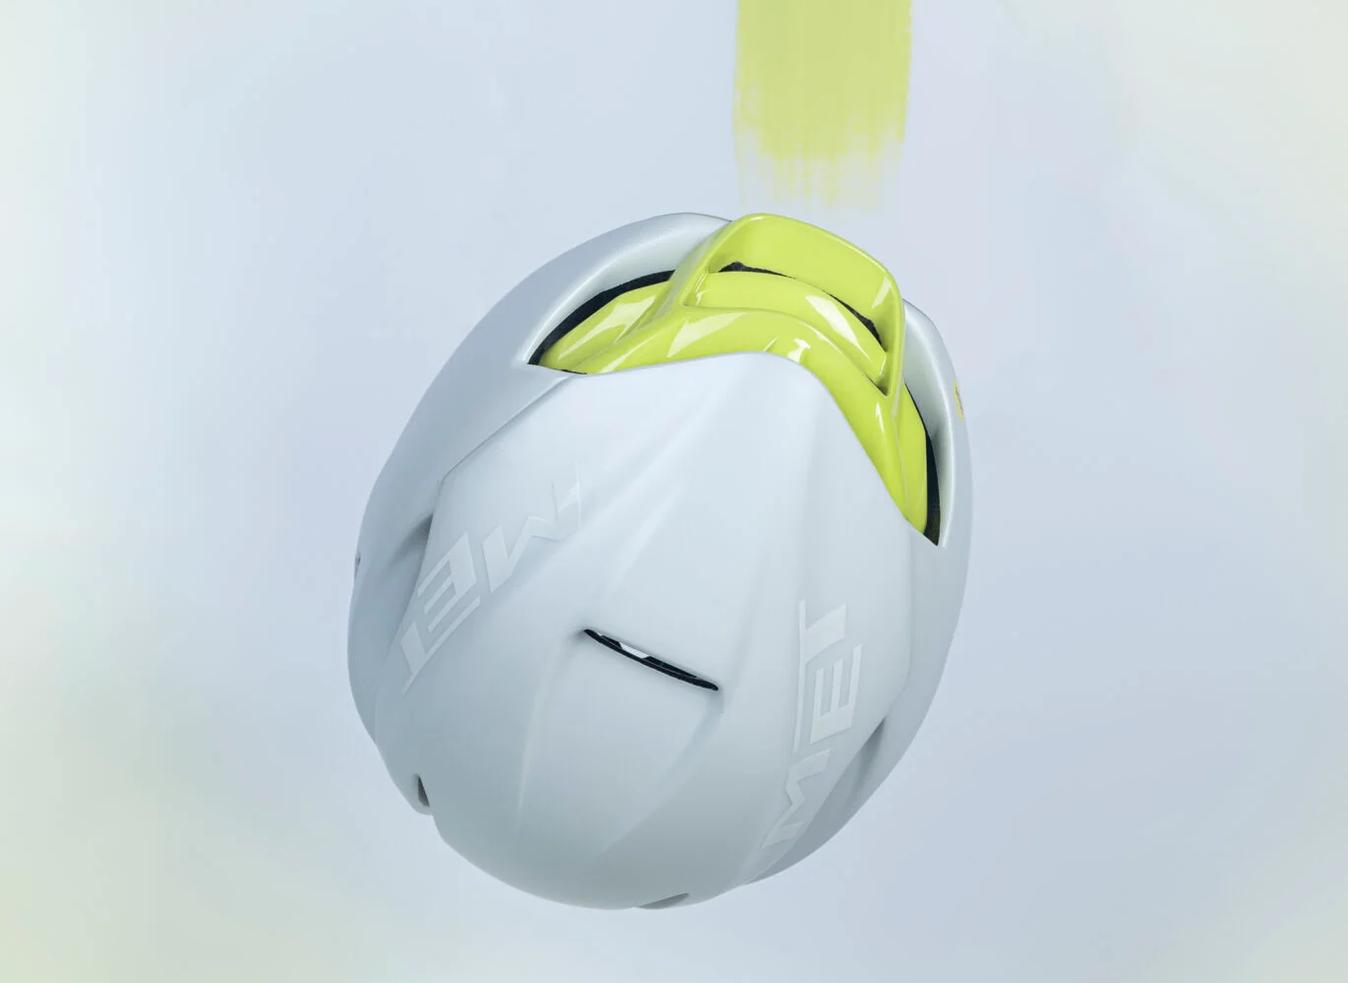 The 'Undyed White' colourway adds lime yellow accents to the white exterior 